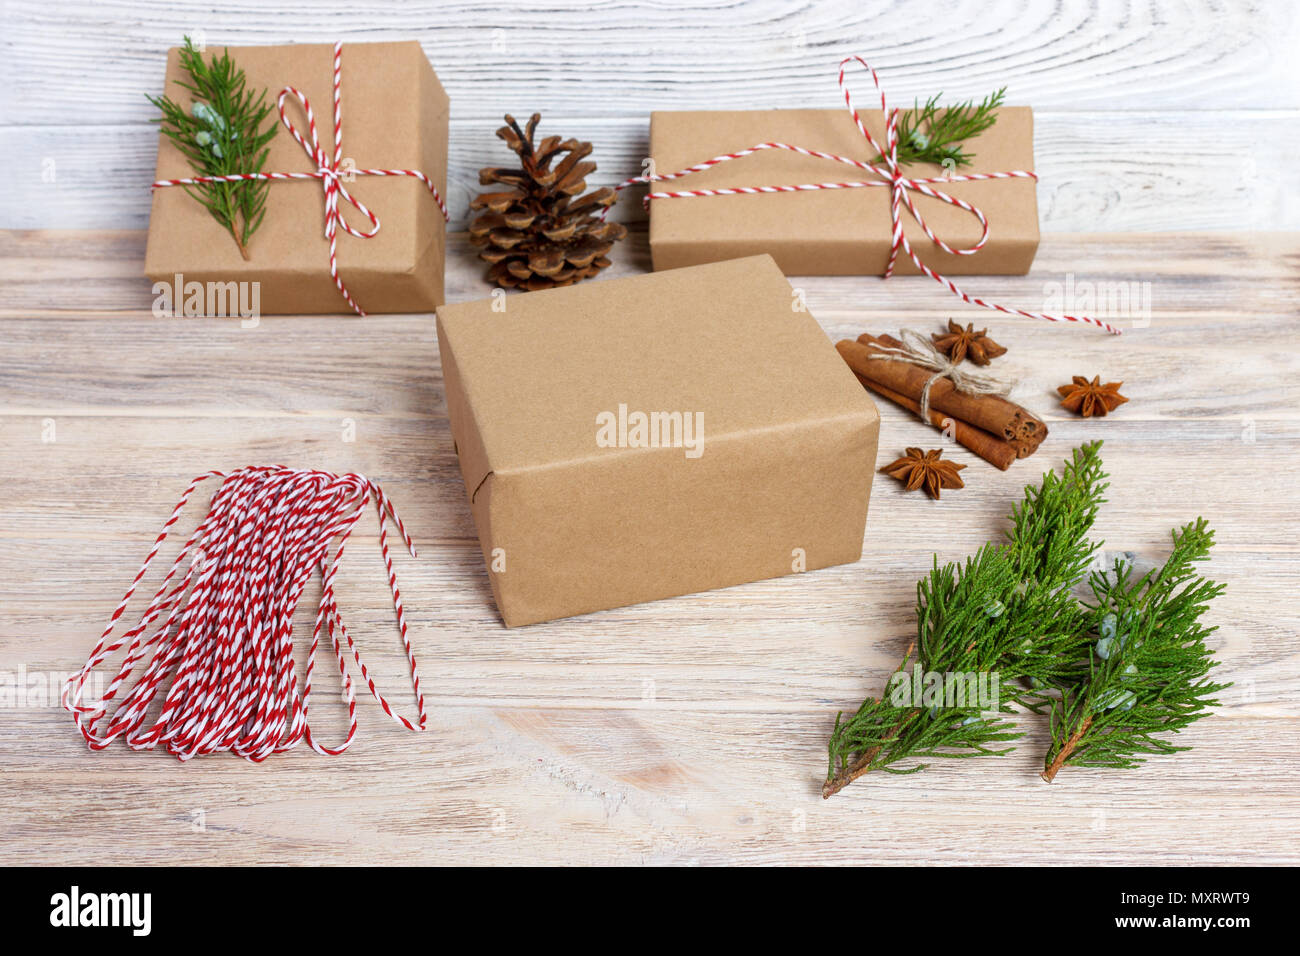 Creative hobby. Gift wrapping. Packaging modern christmas present boxes in stylish gray paper with satin red ribbon. Top view wood table with fir tree Stock Photo